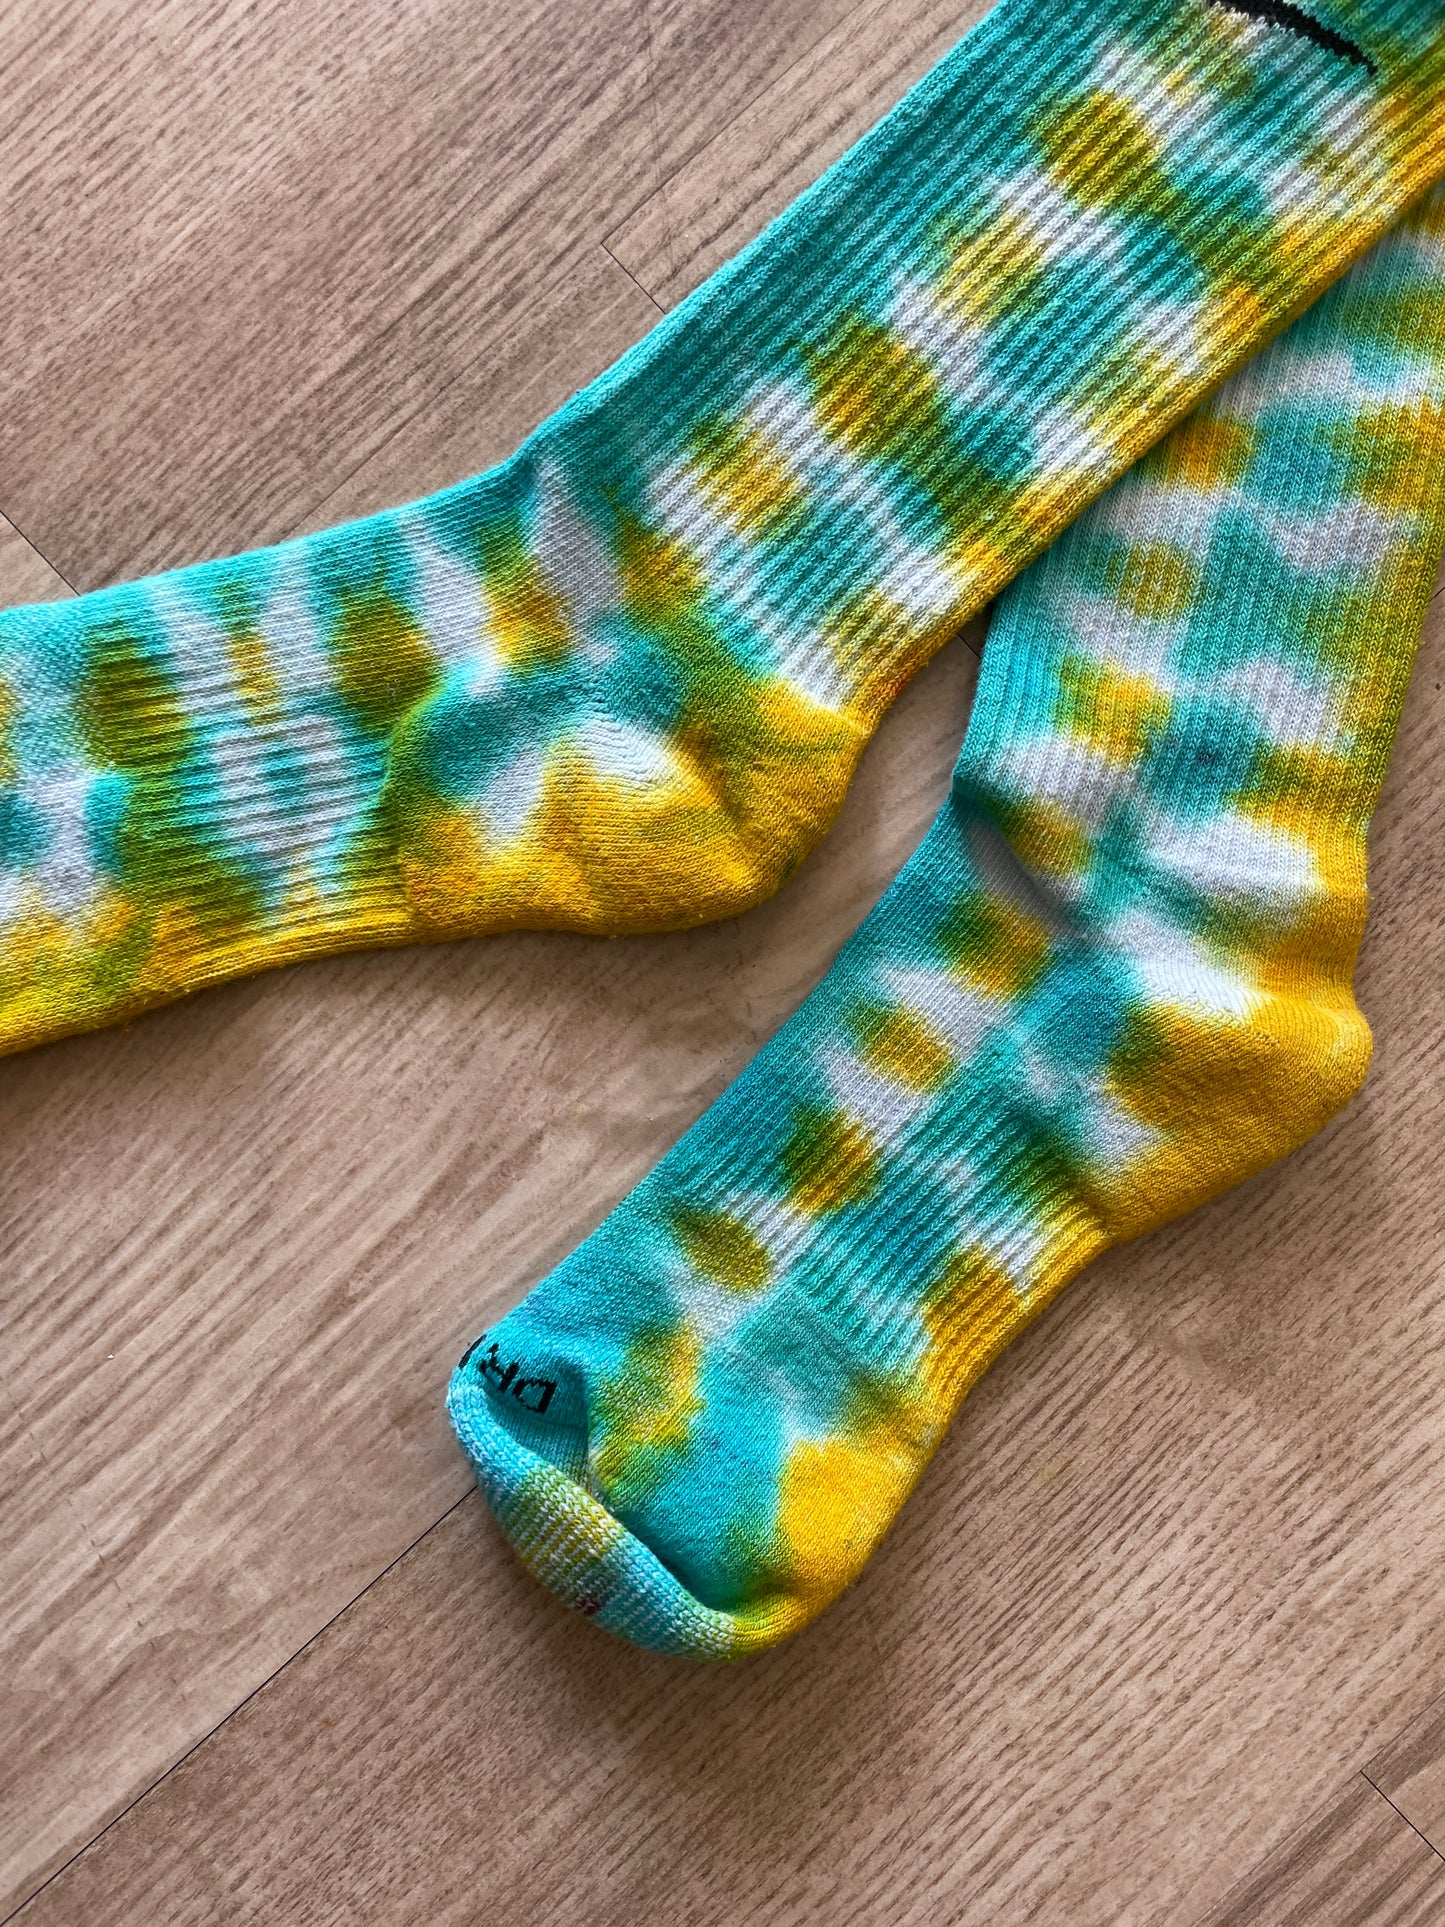 NIKE Socks Hand Tie Dyed Yellow and Teal Nike Dri-FIT Everyday Plus Crew Training Socks - Size Large (Men's 8-12/Women's 10-13)